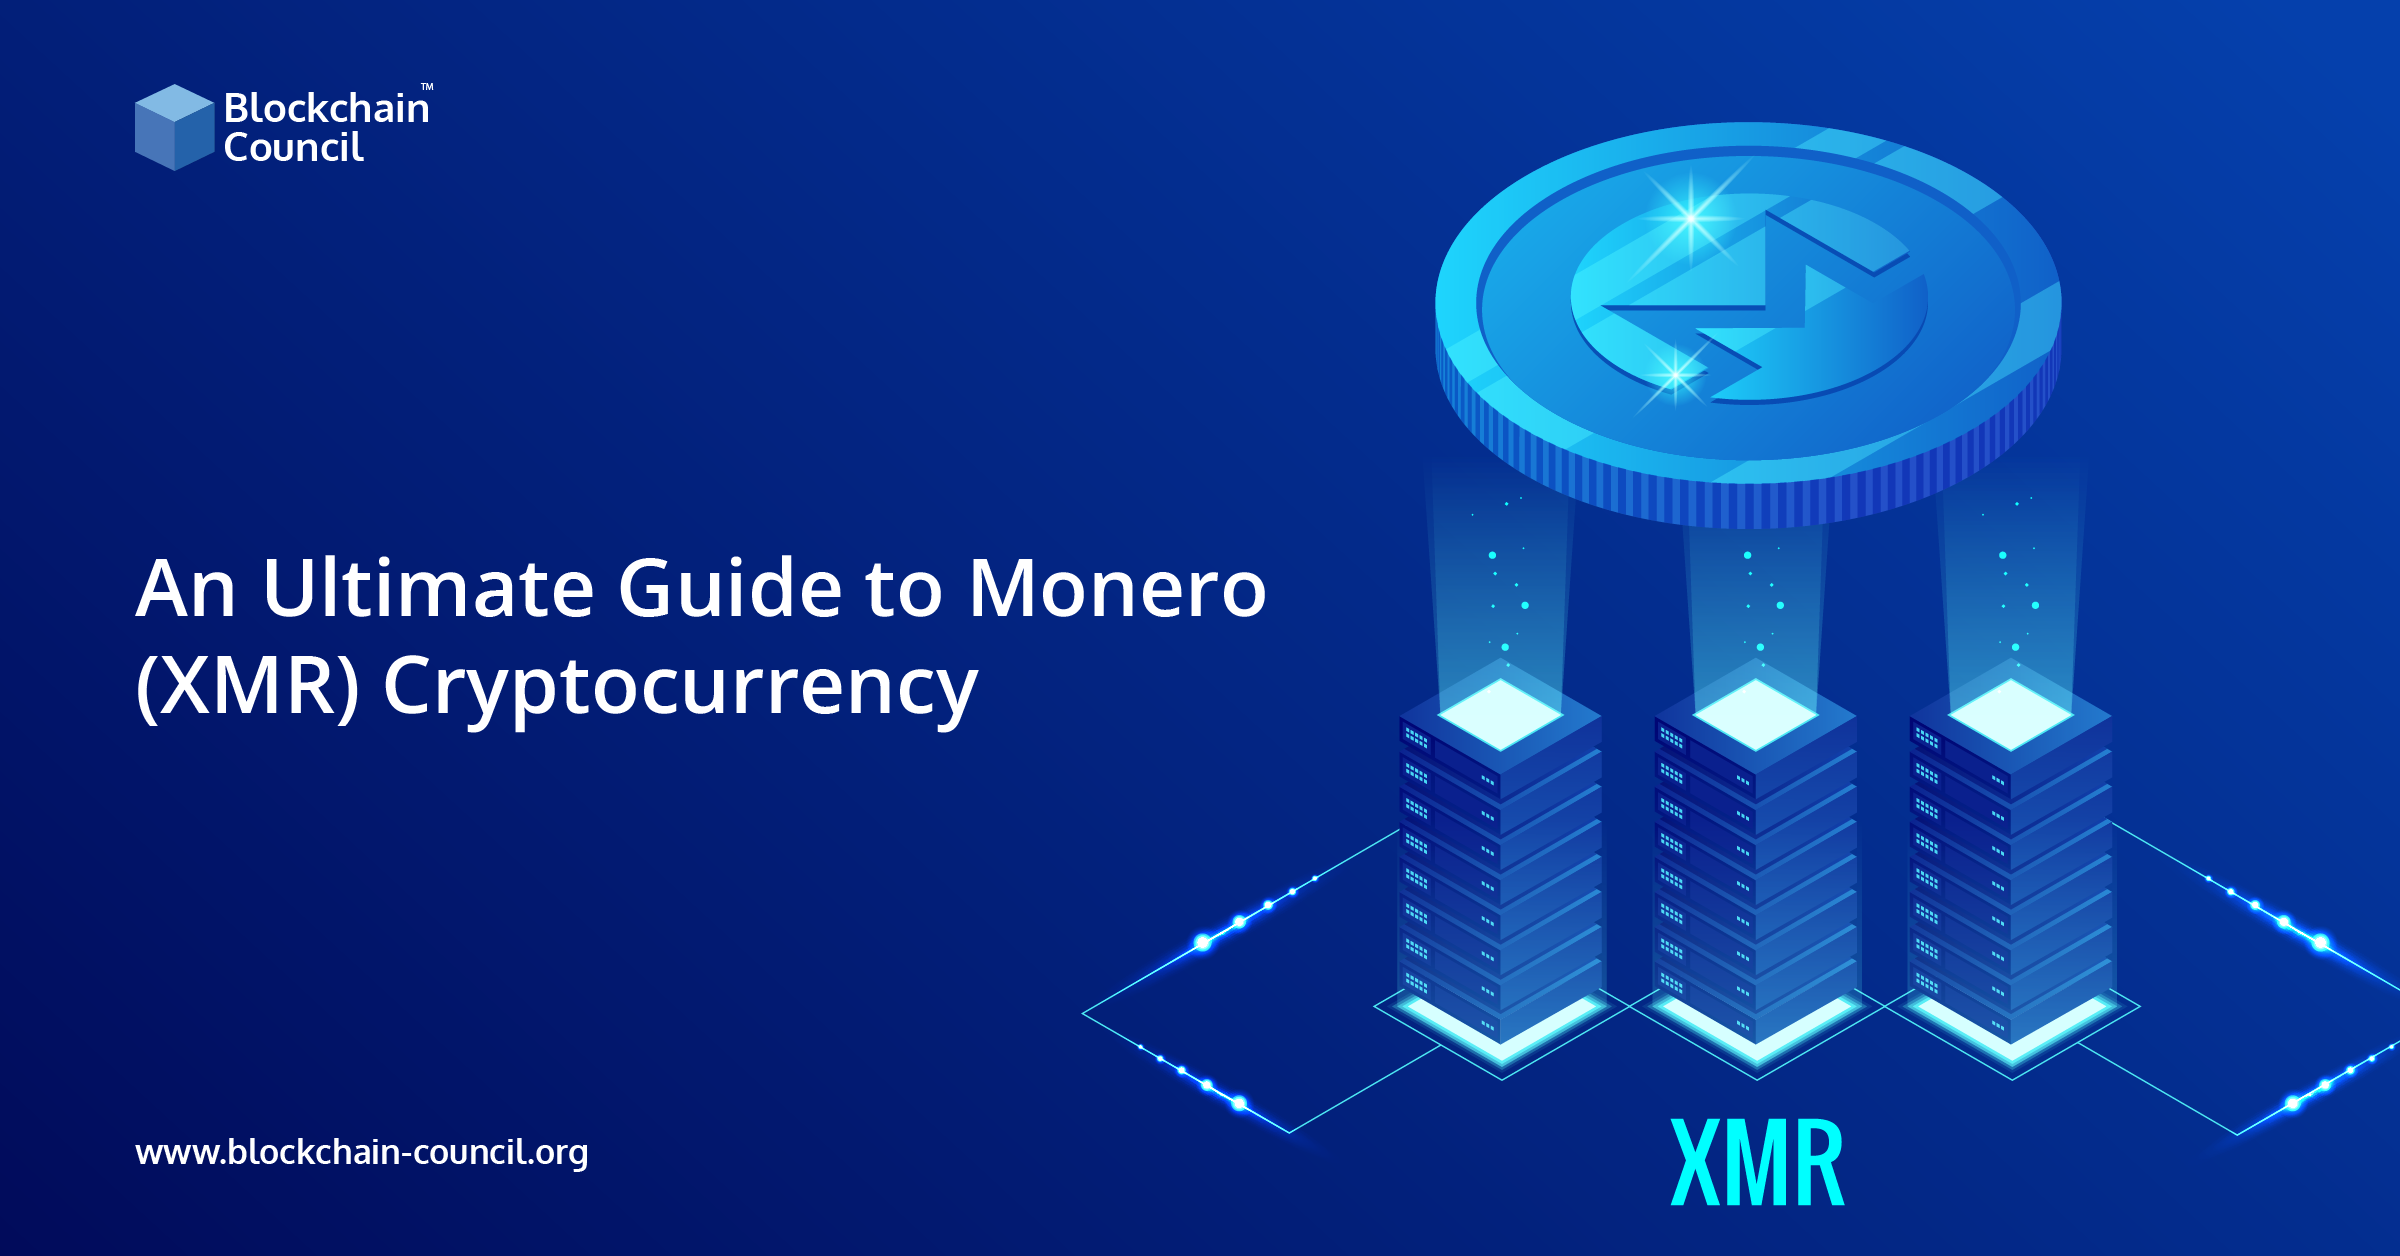 An Ultimate Guide to Monero (XMR) Cryptocurrency